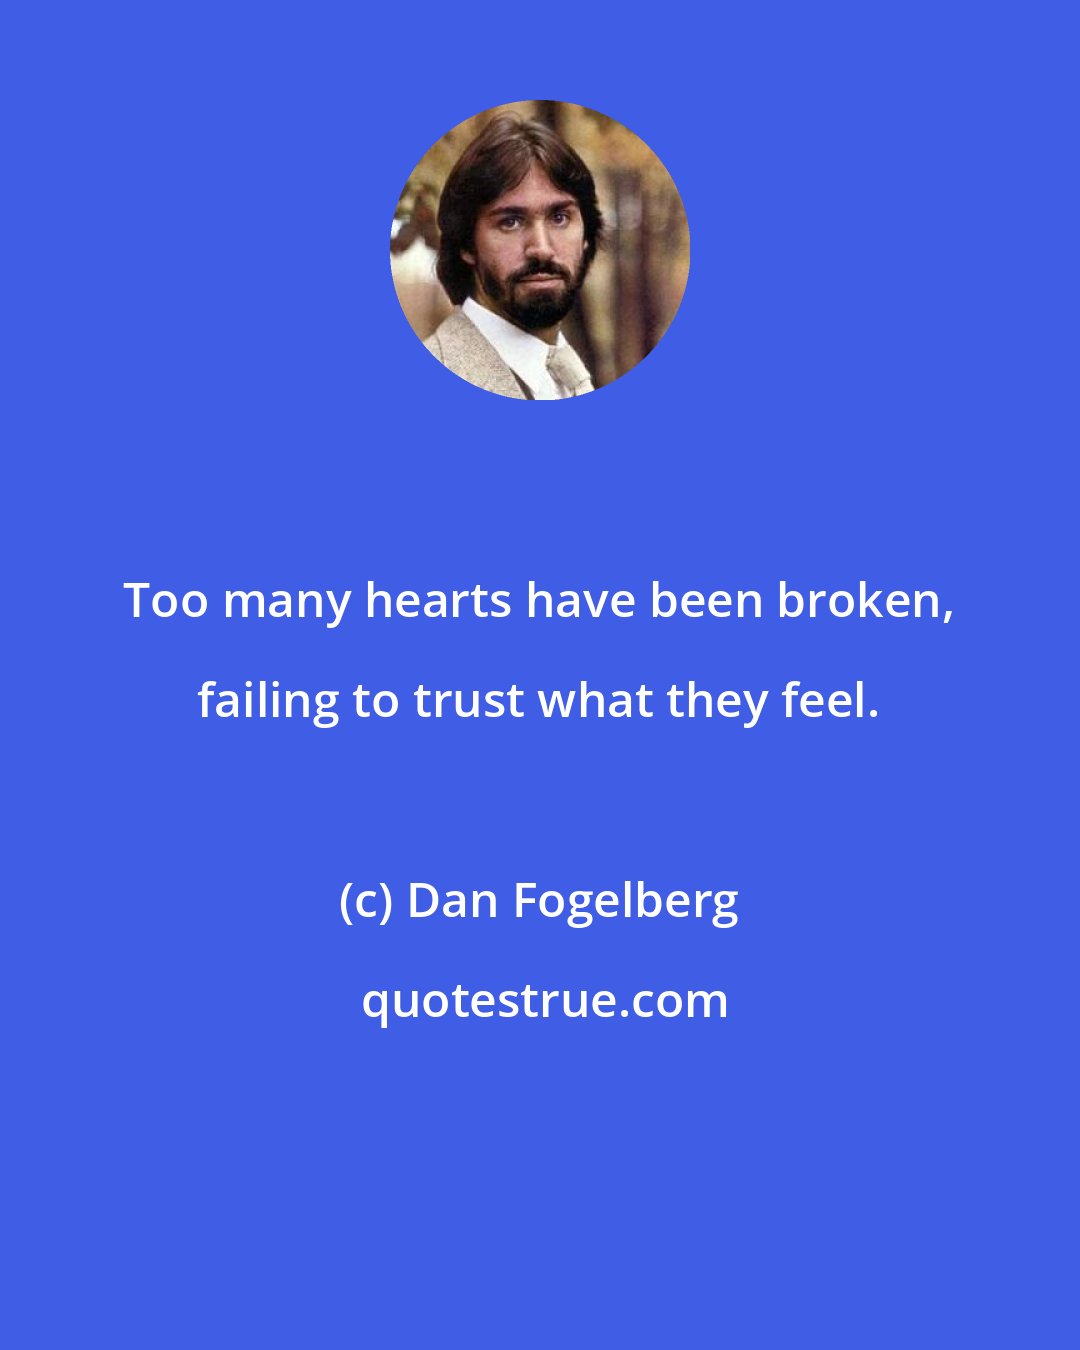 Dan Fogelberg: Too many hearts have been broken, failing to trust what they feel.